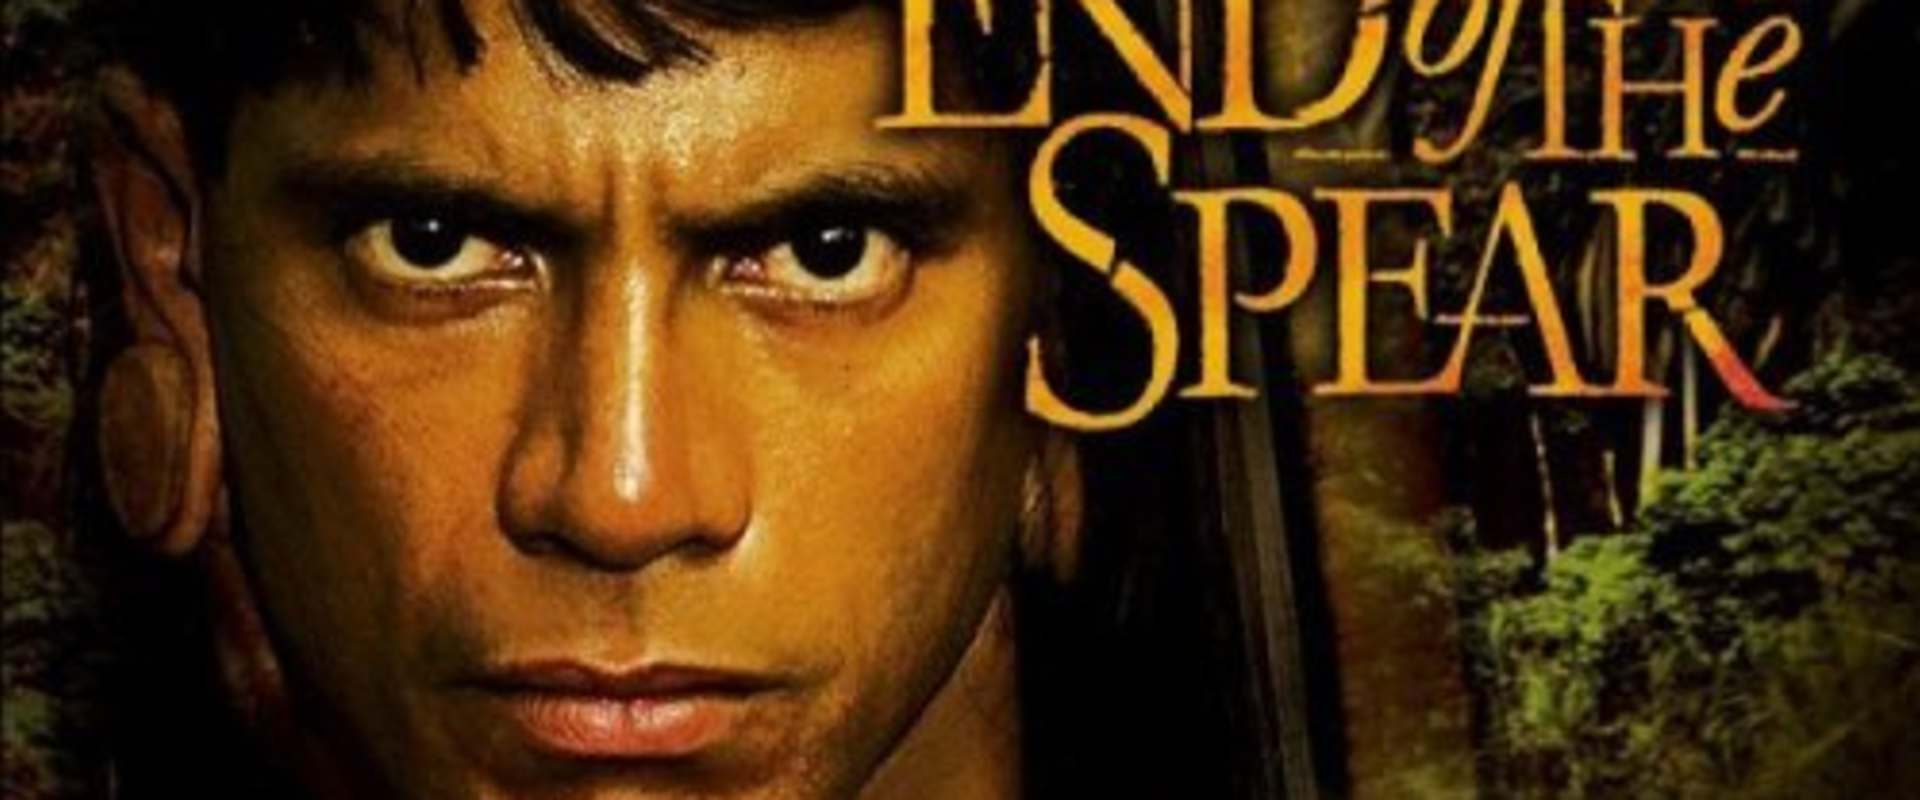 Watch End of the Spear on Netflix Today! | NetflixMovies.com